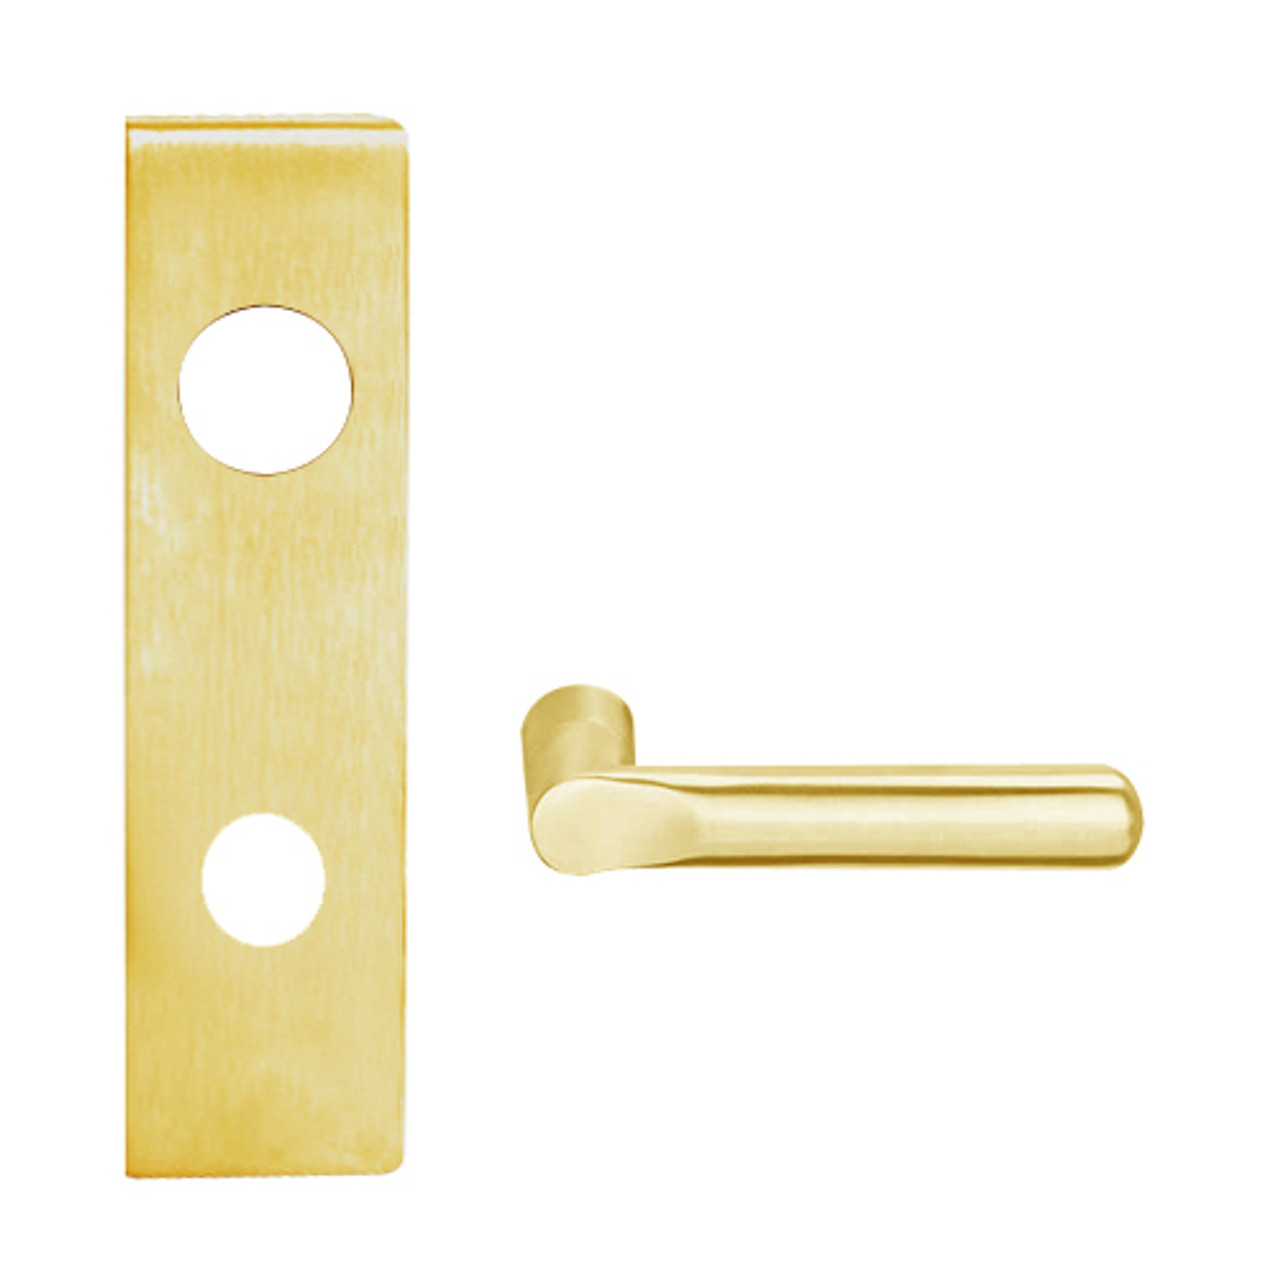 L9050R-18N-605 Schlage L Series Entrance Commercial Mortise Lock with 18 Cast Lever Design and Full Size Core in Bright Brass